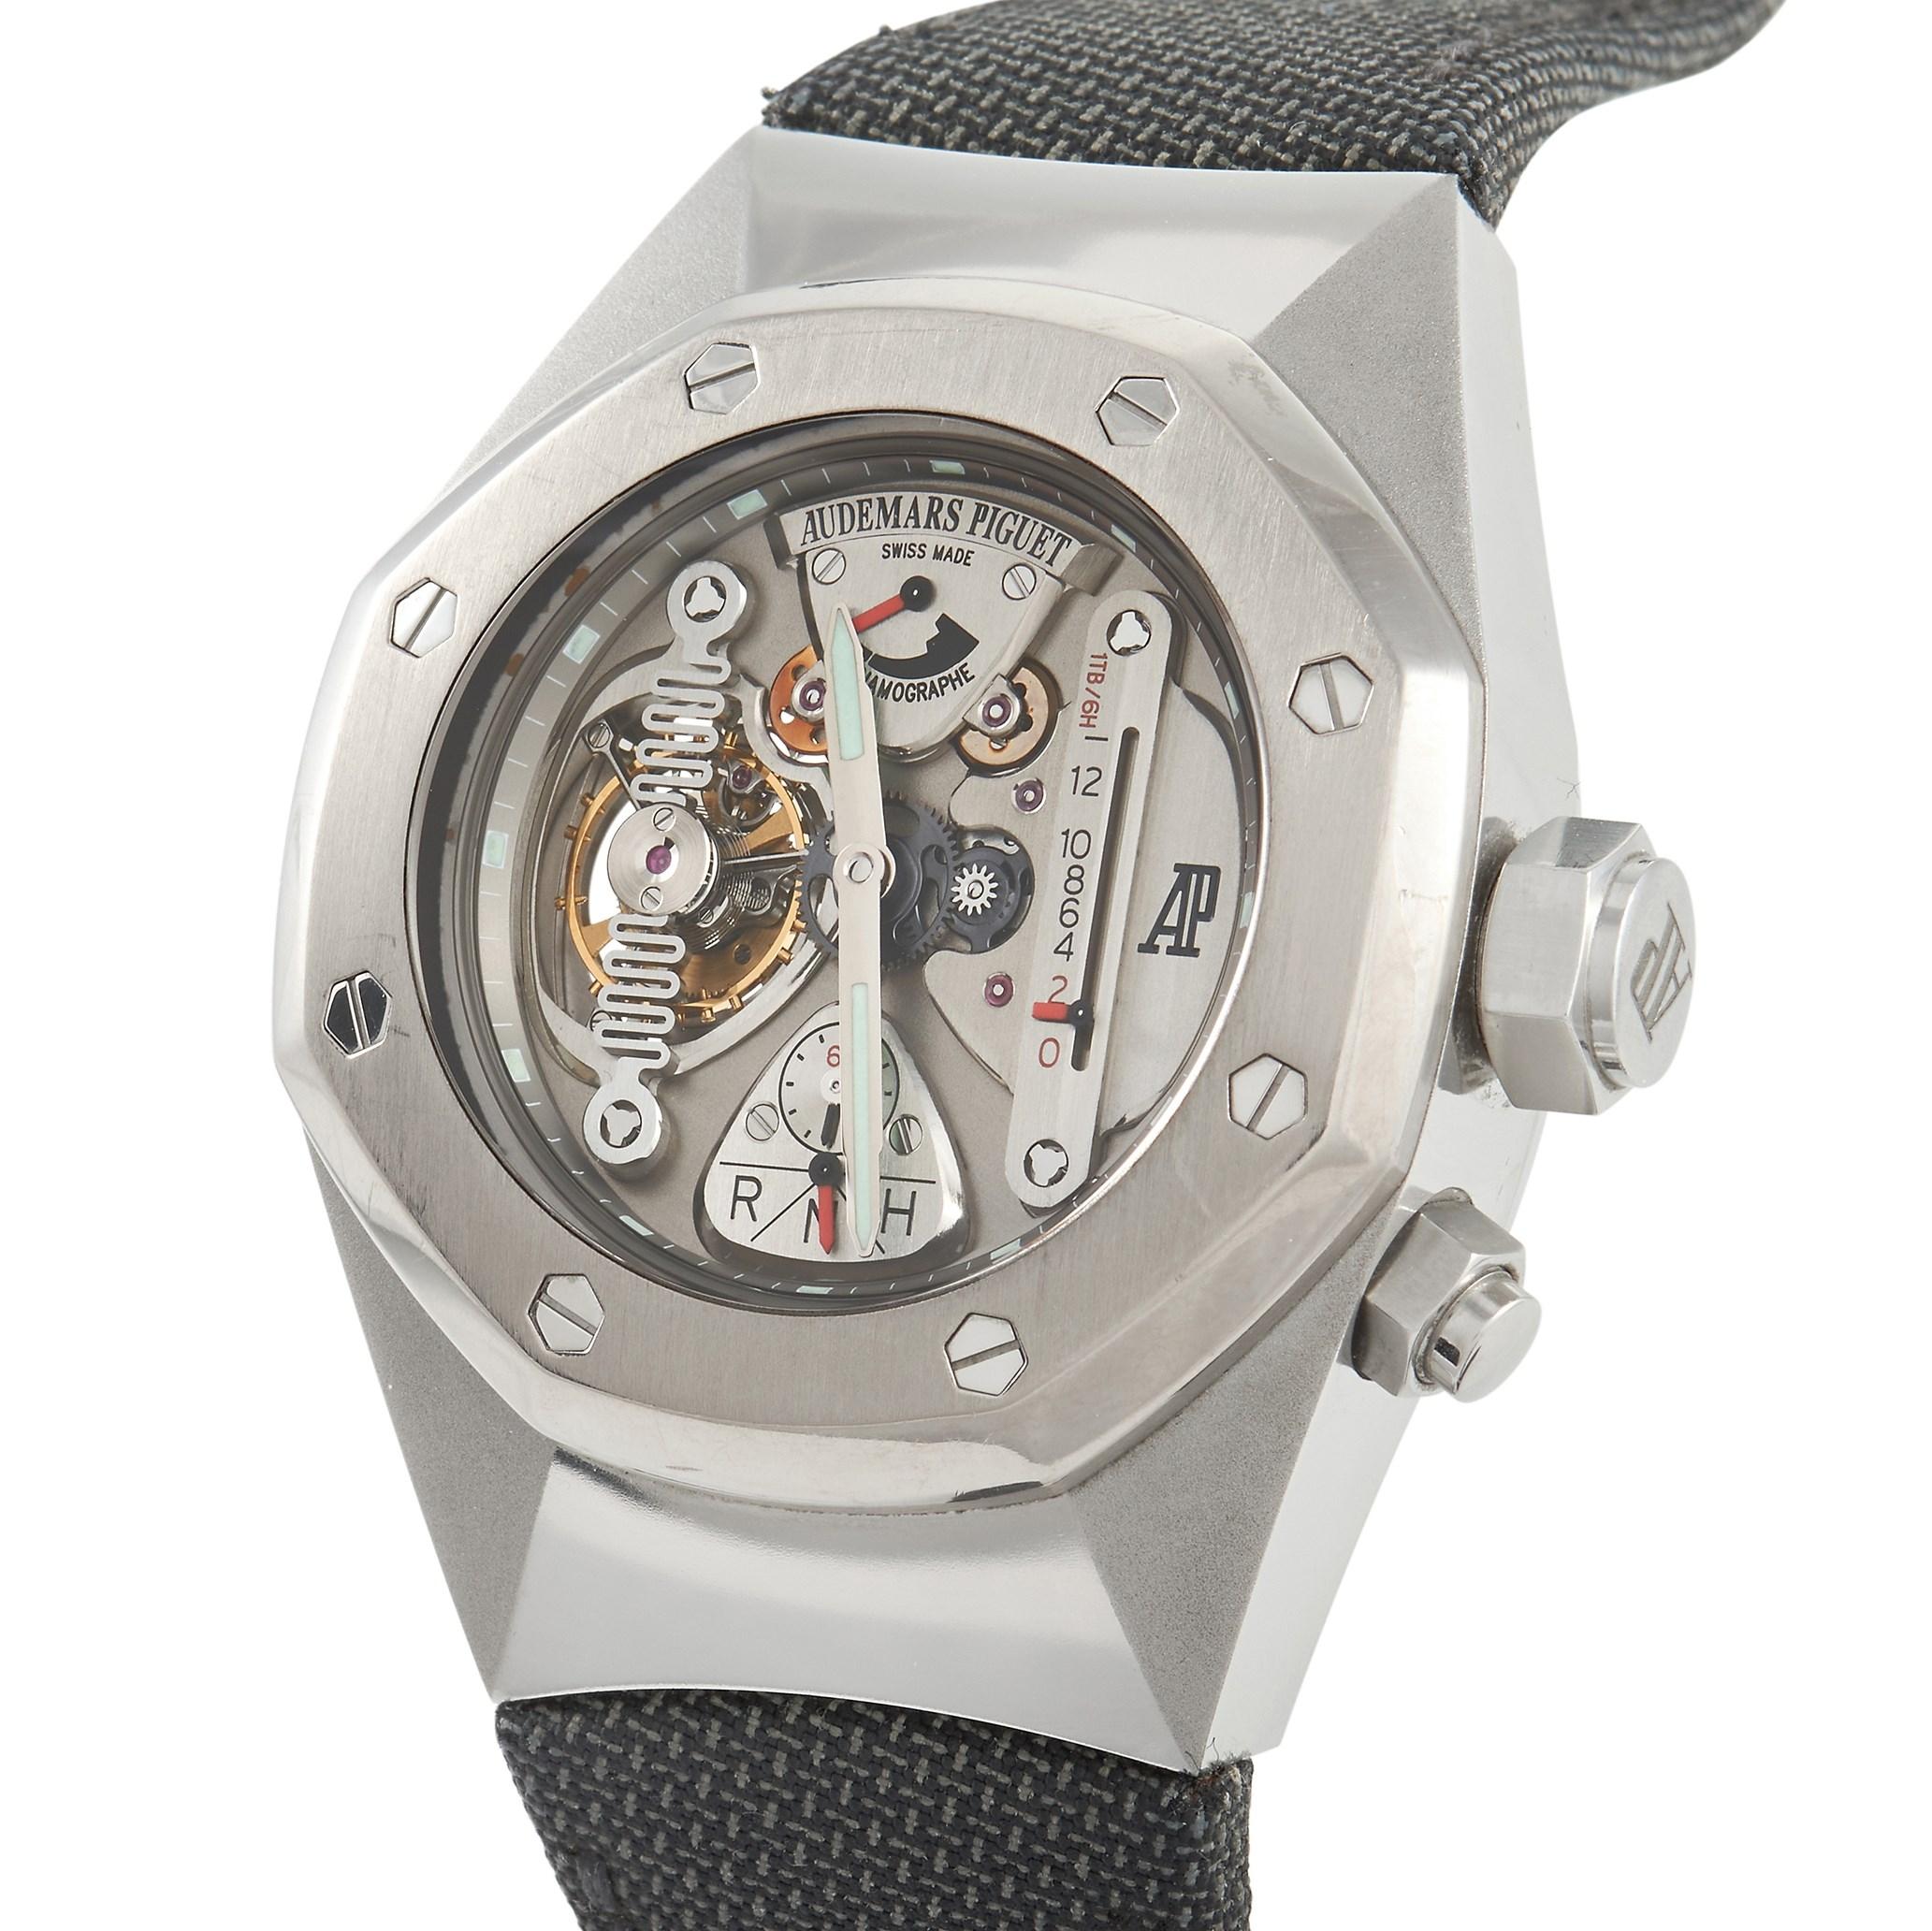 The cutting edge design of this limited edition Audemars Piguet Royal Oak  Concept 1 Alacrite Tourbillon Watch 25980AI.00D00354.01 makes it all the more covetable. Limited to only 150 pieces, this Royal Oak Concept timepiece with open-worked